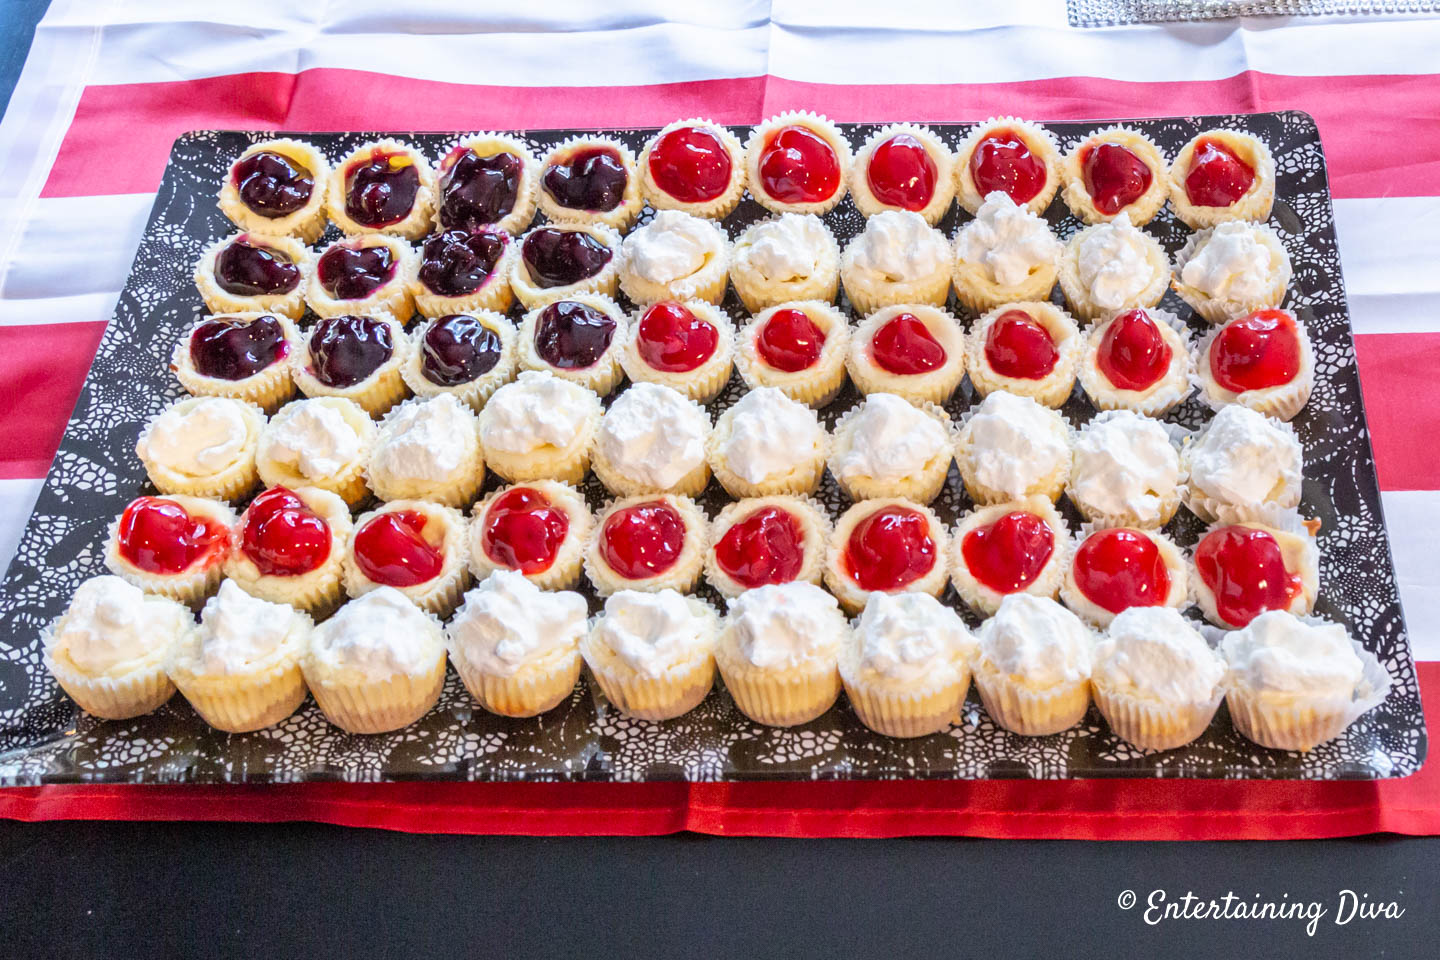 blueberry, cherry and whipped cream mini cheesecakes in an American flag design